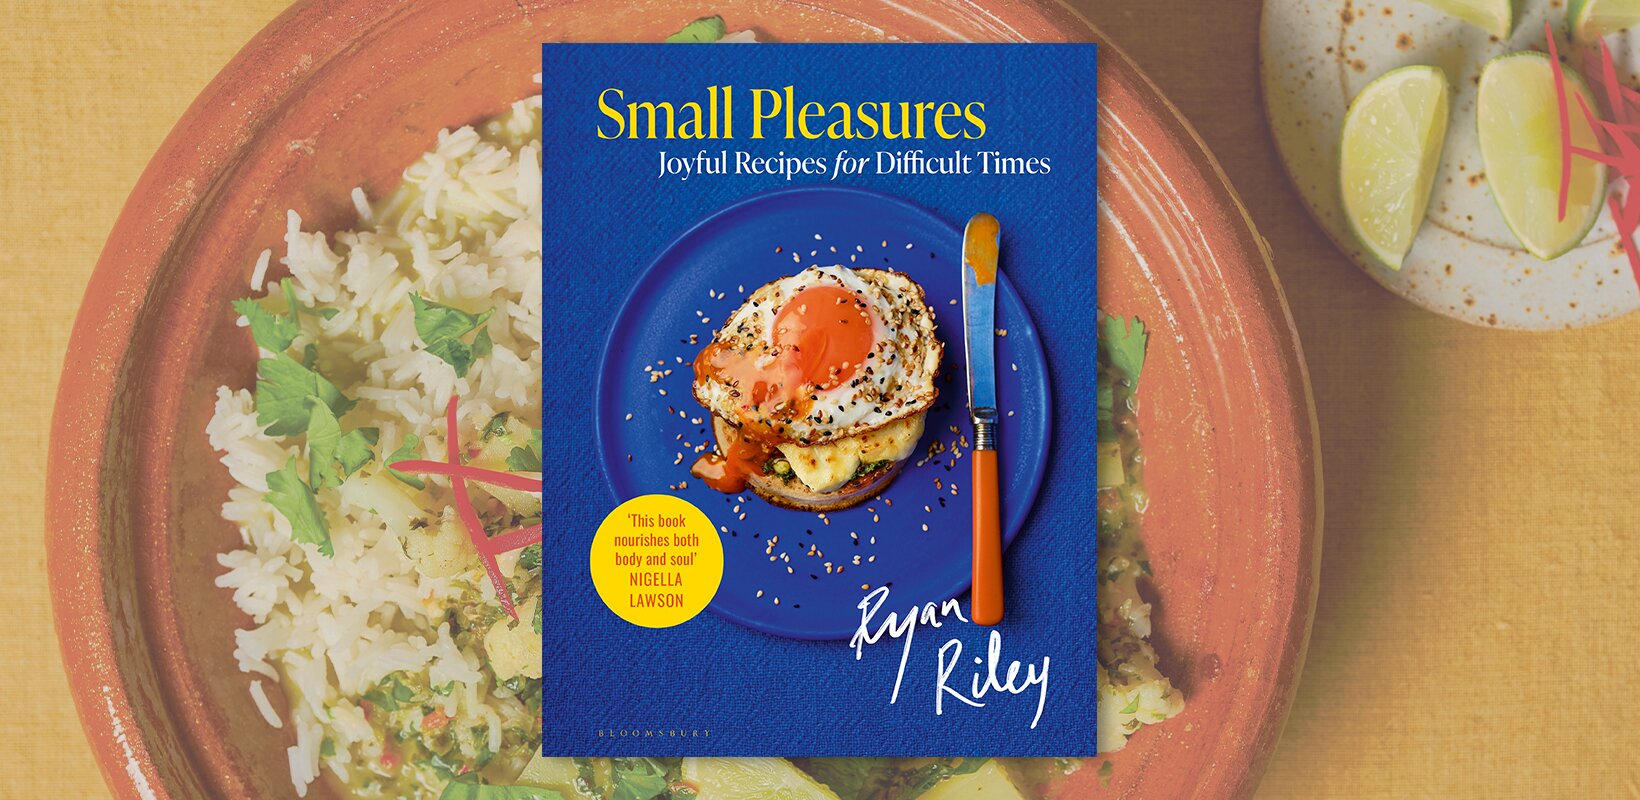 Book review: Small Pleasures by Ryan Riley